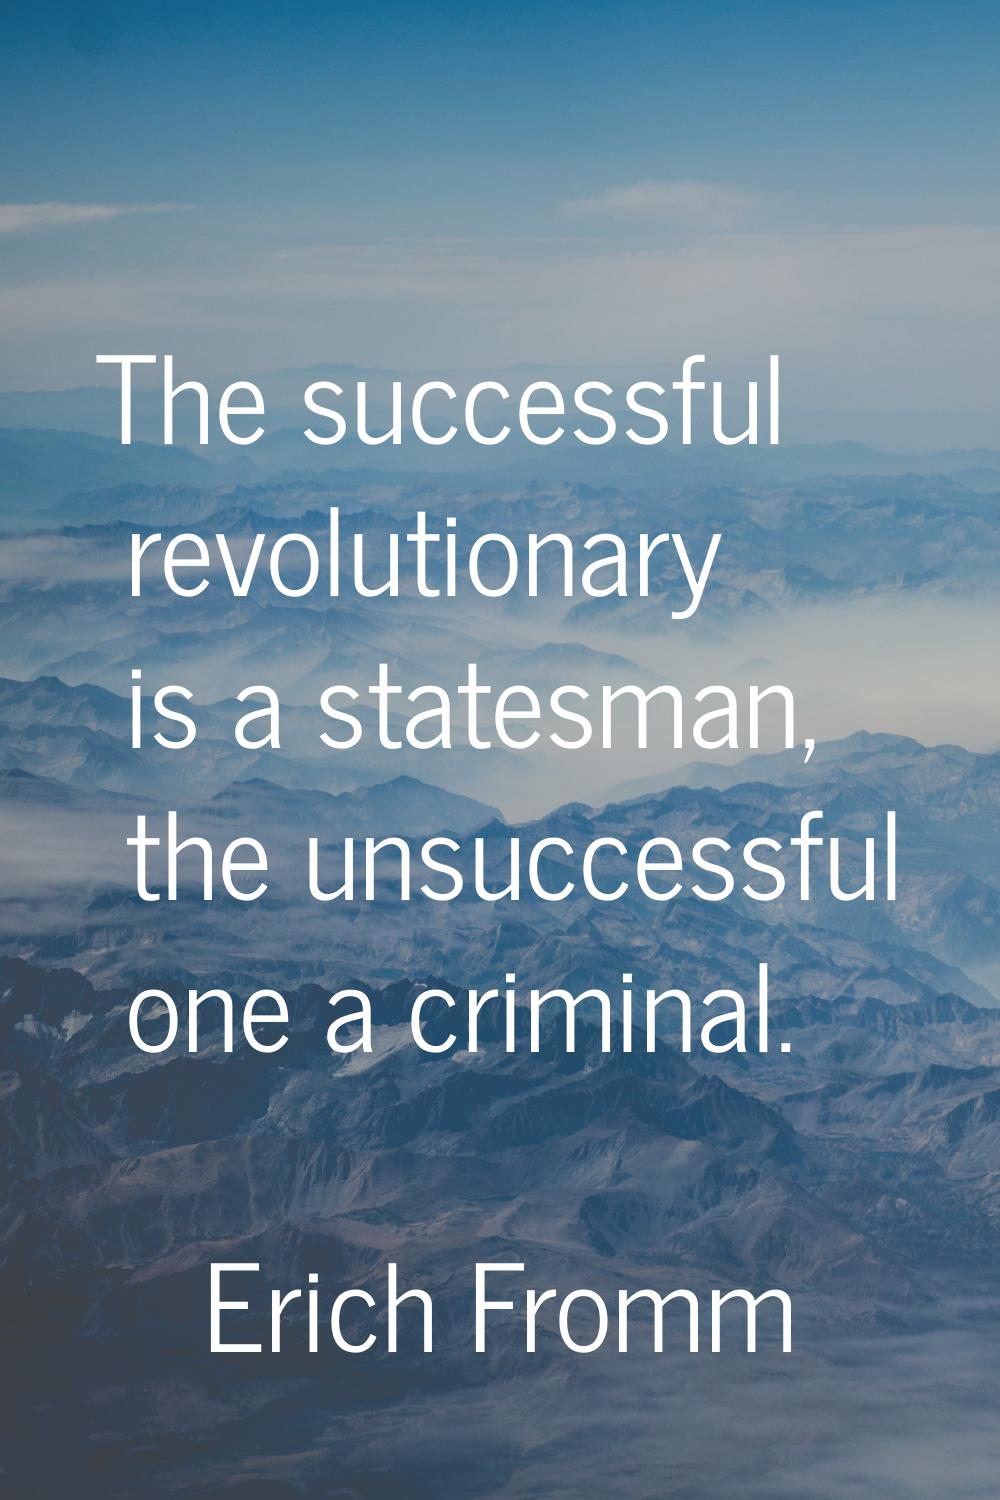 The successful revolutionary is a statesman, the unsuccessful one a criminal.